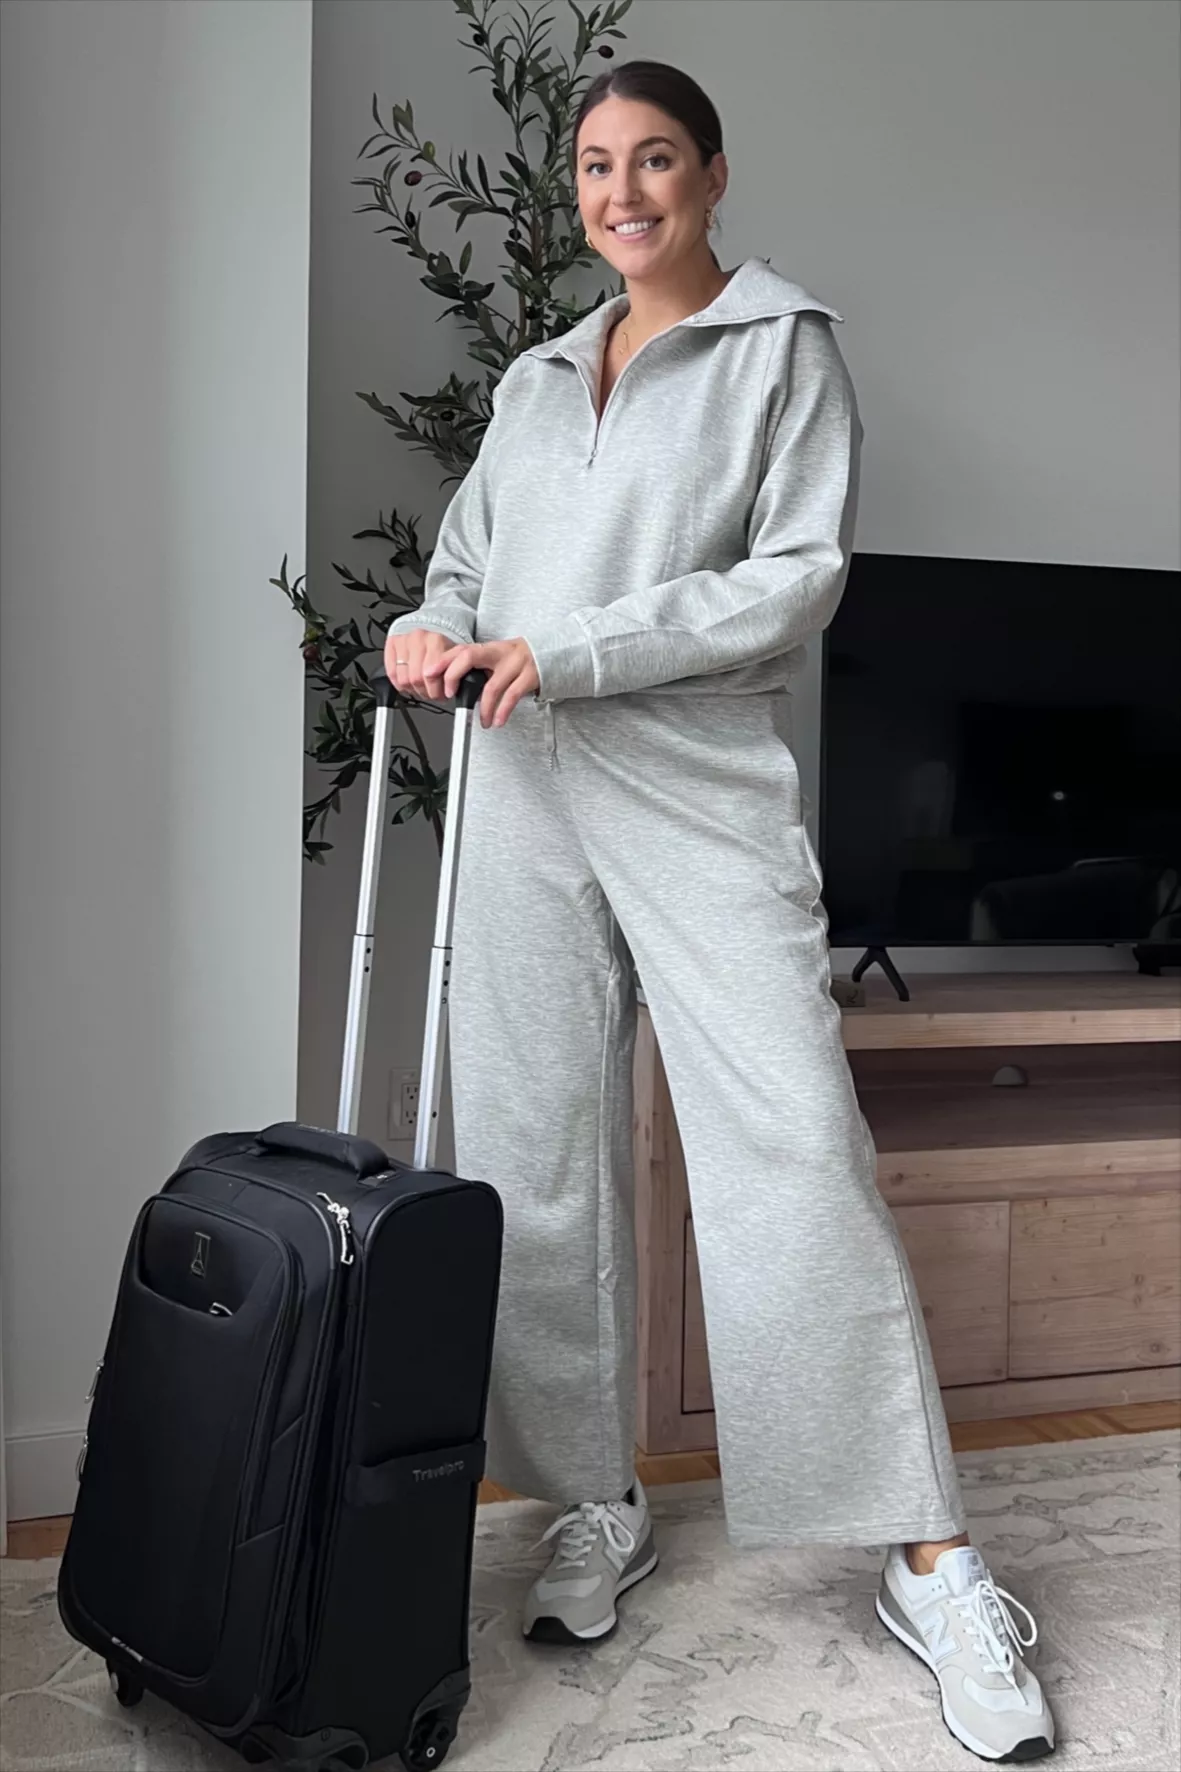  Womens Travel Outfit For Airplane